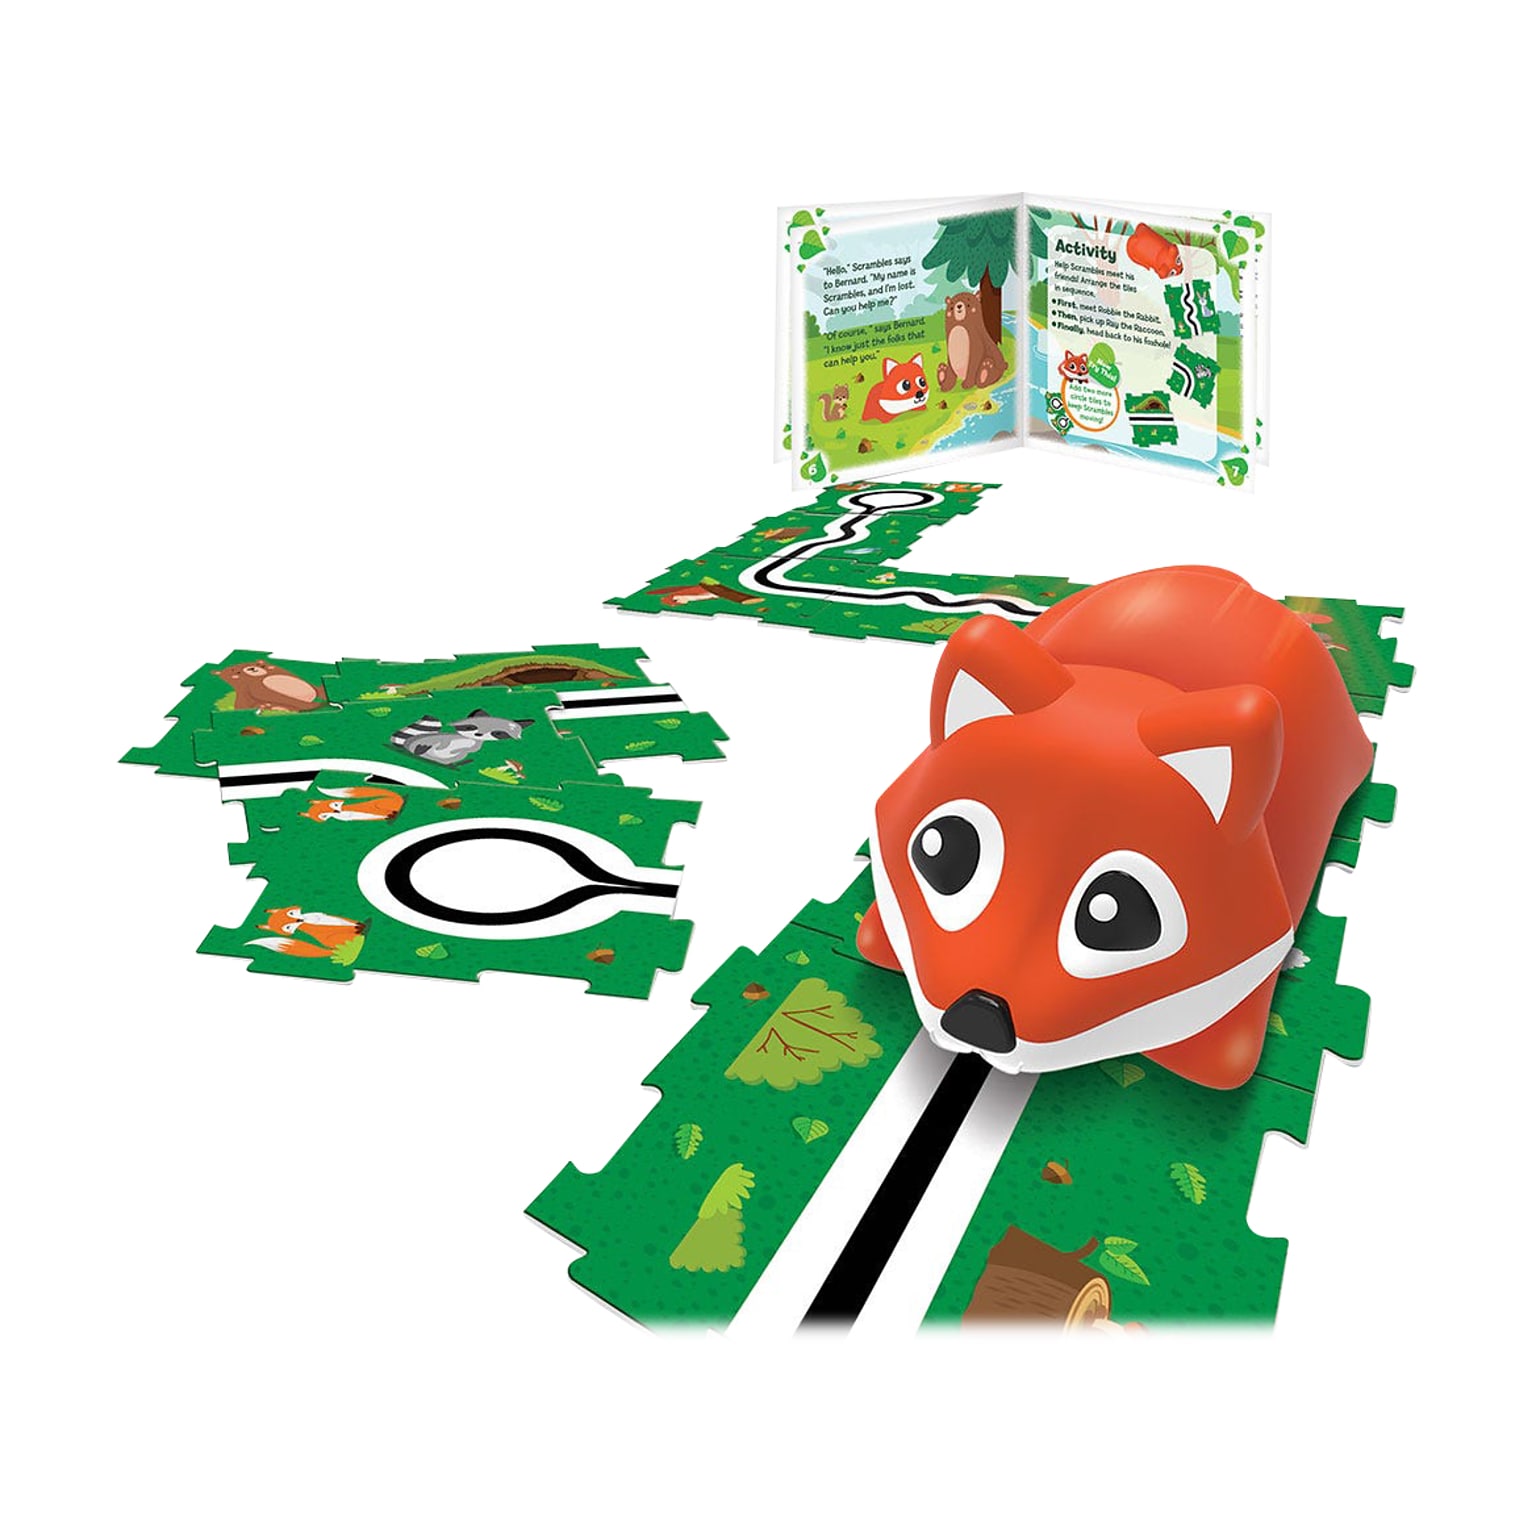 Learning Resources Coding Critters Go-Pets Scrambles the Fox, Orange/Green (LER 3097)